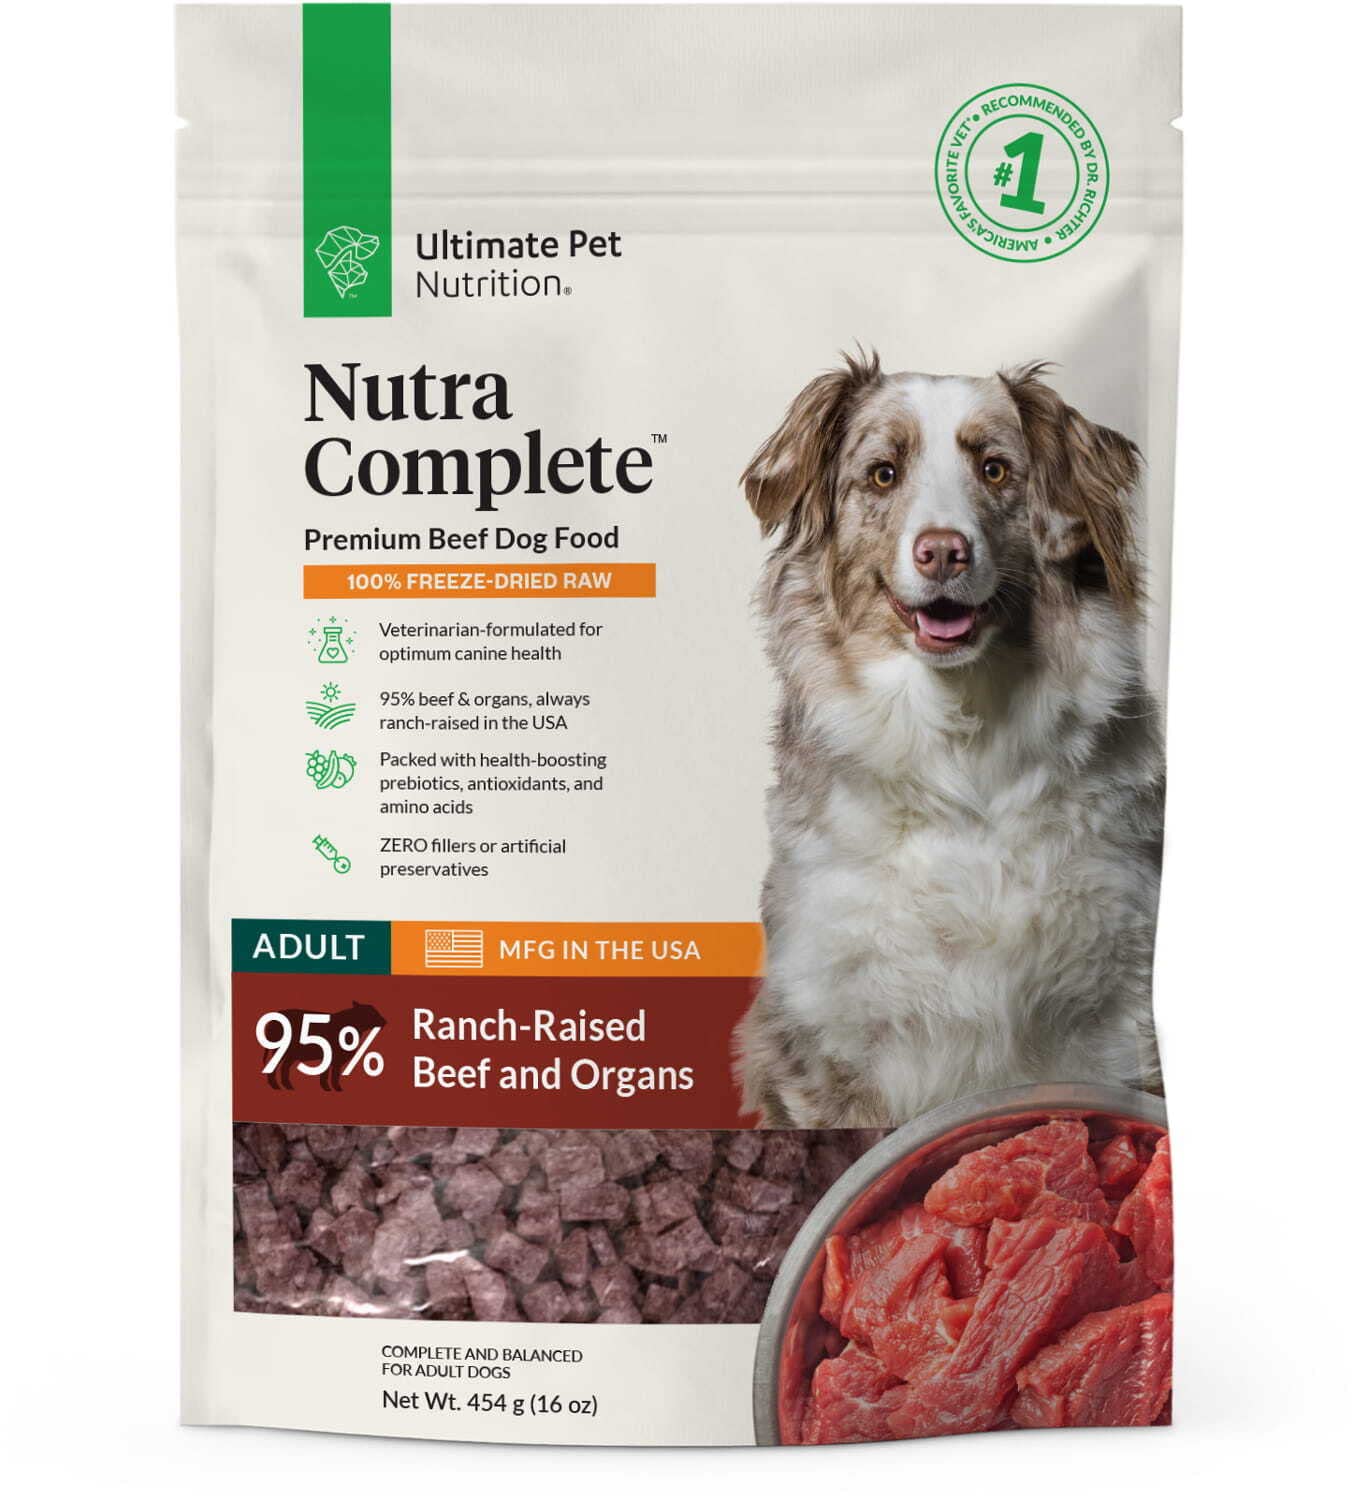 Who Sells Nutra Complete Dog Food?